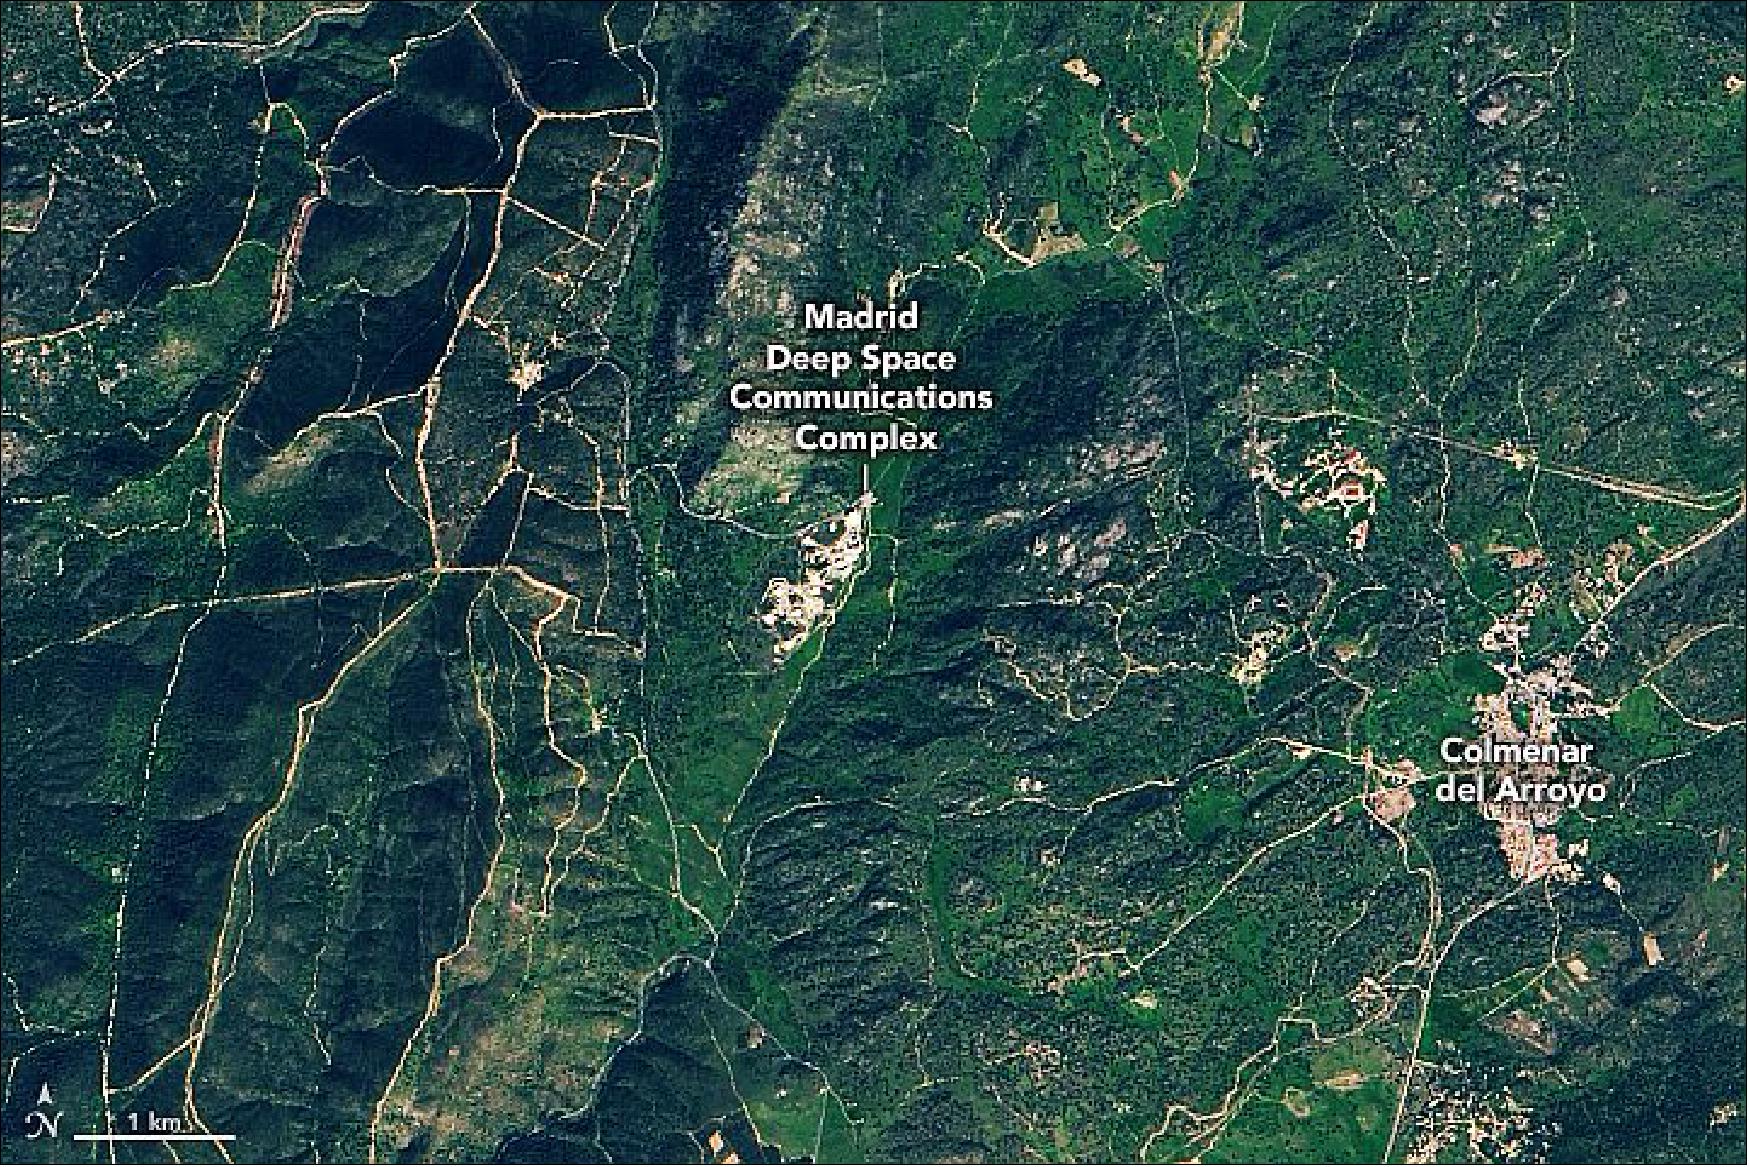 Figure 15: On March 17, 2021, the Operational Land Imager (OLI) on Landsat-8 acquired this natural-color image of one of the communications hubs in Robledo de Chavela, about 50 km (30 miles) west of Madrid, Spain. The complex has several large radio antennas with parabolic dishes that appear as white circles in the Landsat image. The location was chosen because it was equidistant to DSN stations in Goldstone, California and Canberra, Australia. The strategic placement allows for continuous communication with spacecraft as Earth rotates (image credit: NASA Earth Observatory image by Lauren Dauphin, using Landsat data from the U.S. Geological Survey. Story by Adam Voiland)